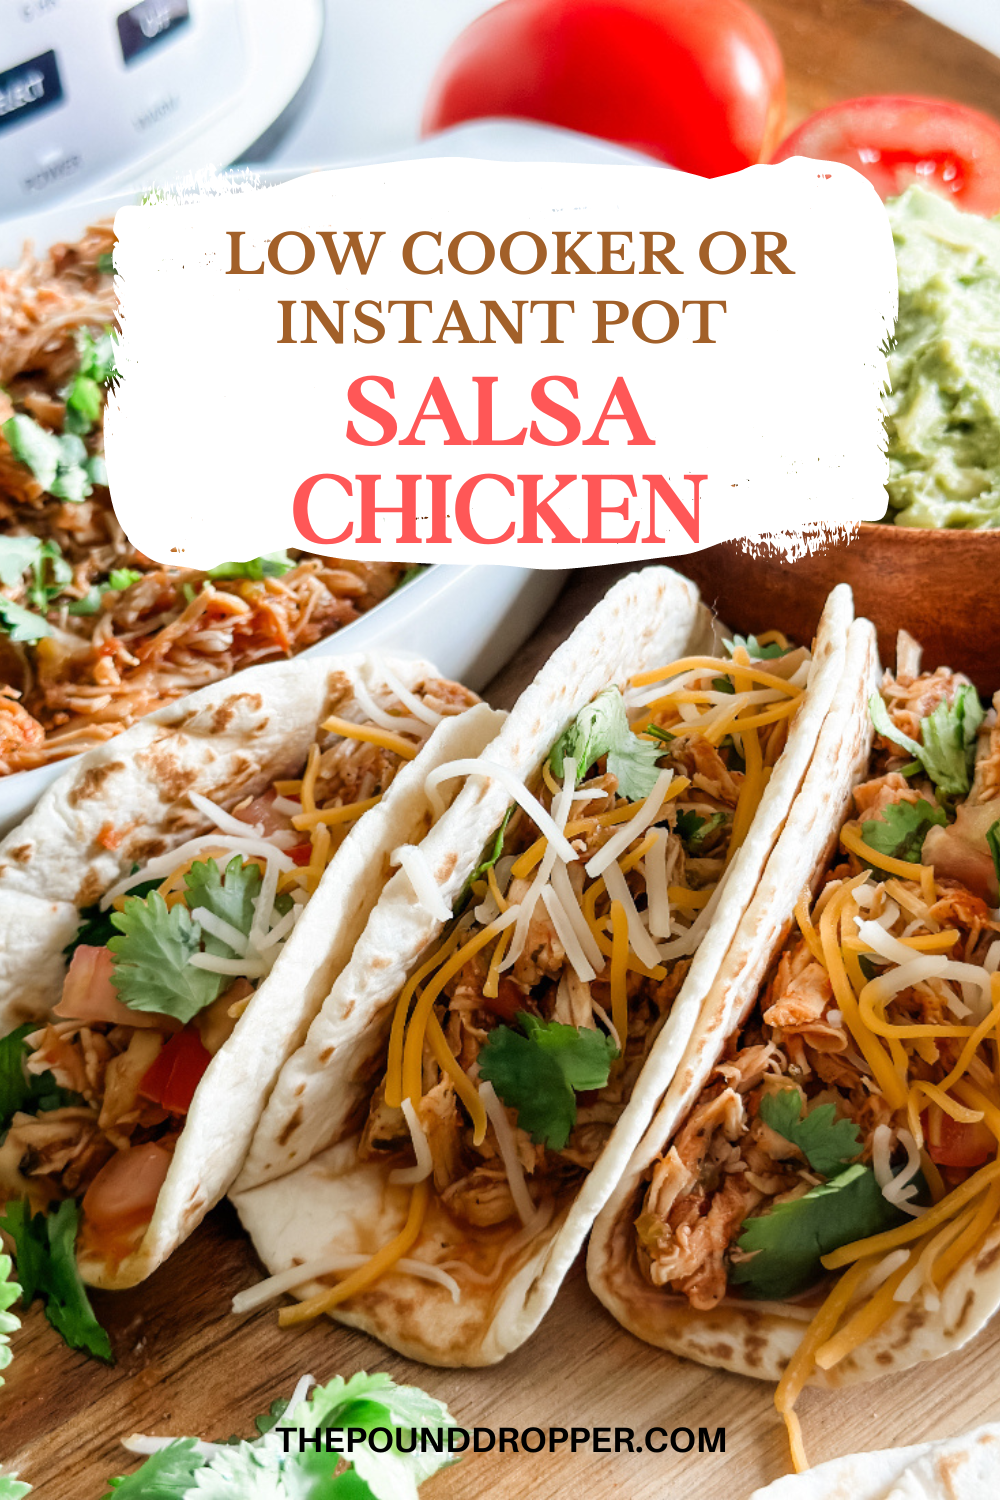 This Slow Cooker or Instant Pot Salsa Chicken is great as a filling or topping! This Salsa Chicken can be used for tacos, baked potatoes, nachos, salads, enchiladas, tostadas, quesadillas and burritos or burrito bowls! via @pounddropper